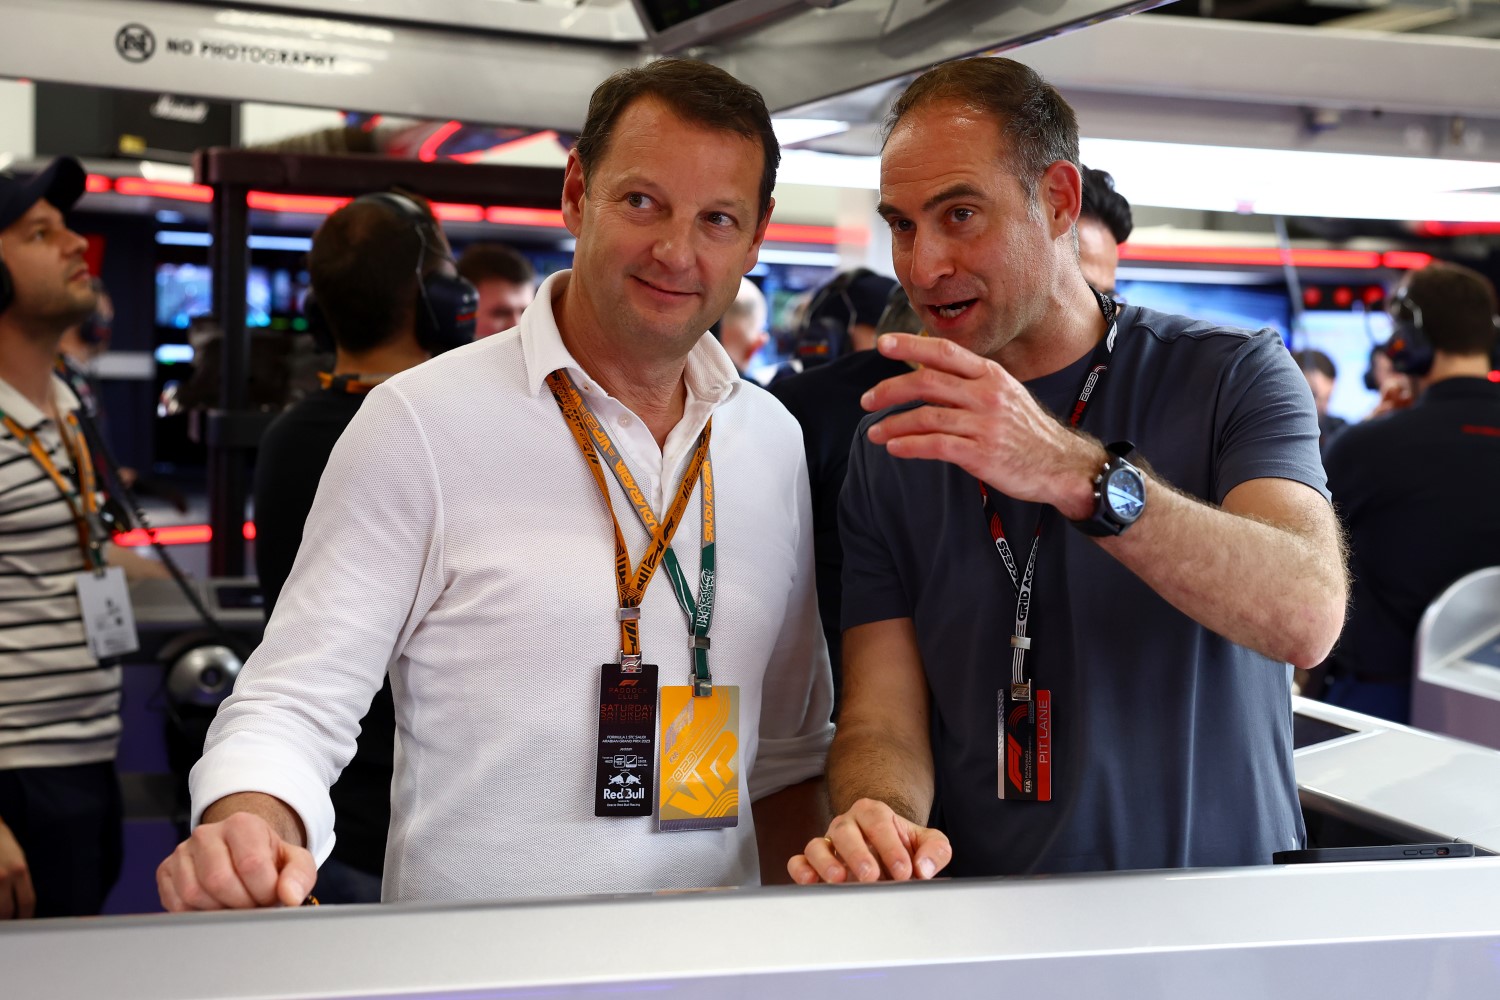 Franz Watzlawick, CEO Beverage Business of Red Bull and Oliver Mintzlaff, Red Bull Head of Sports